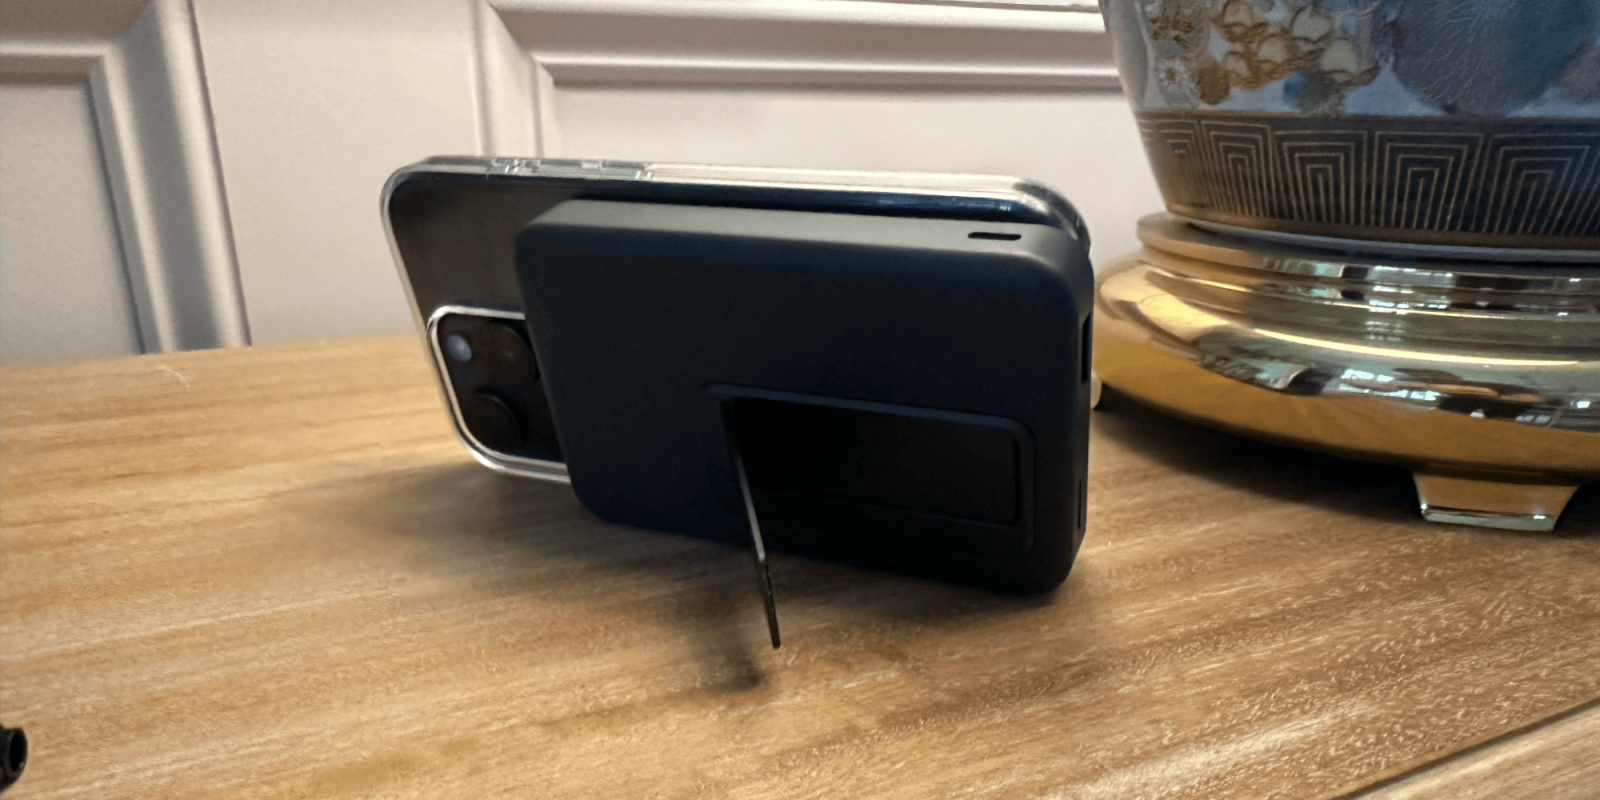 Add 10,000mAh of power to your iPhone with this magnetic stand